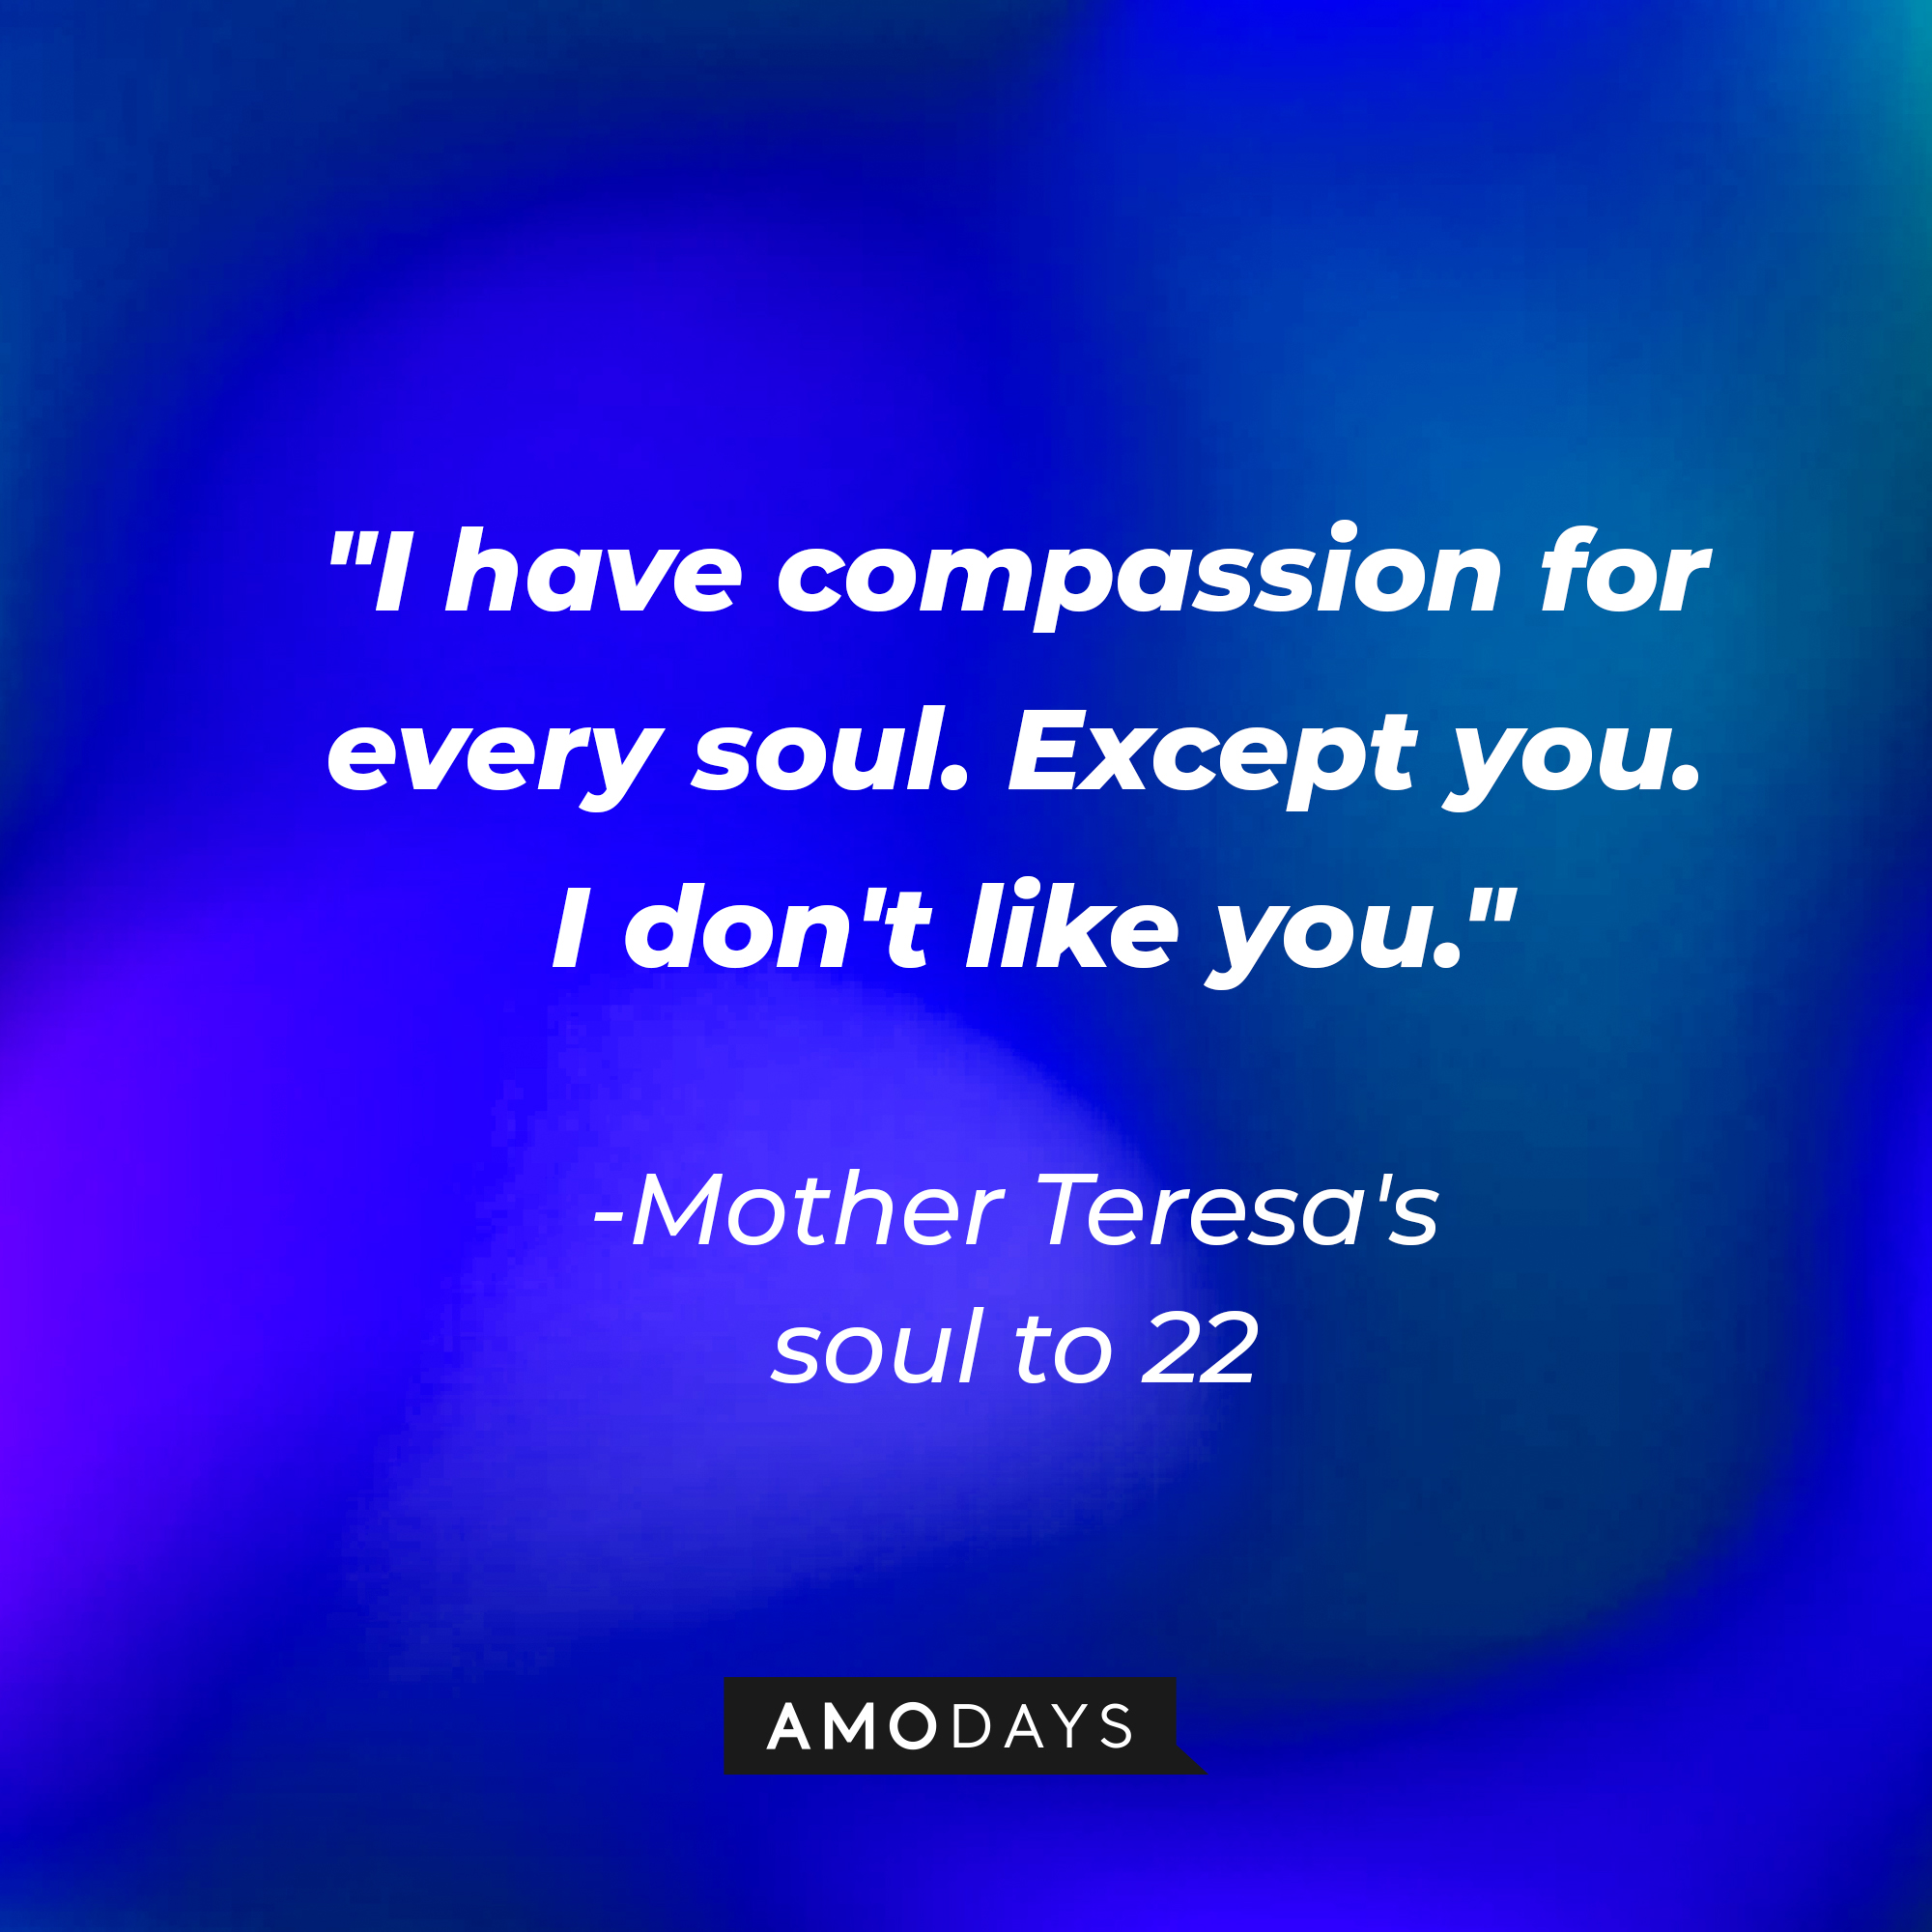 A quote of Mother Teresa's soul to 22 : "I have compassion for every soul. Except you. I don't like you." | Source: youtube.com/pixar